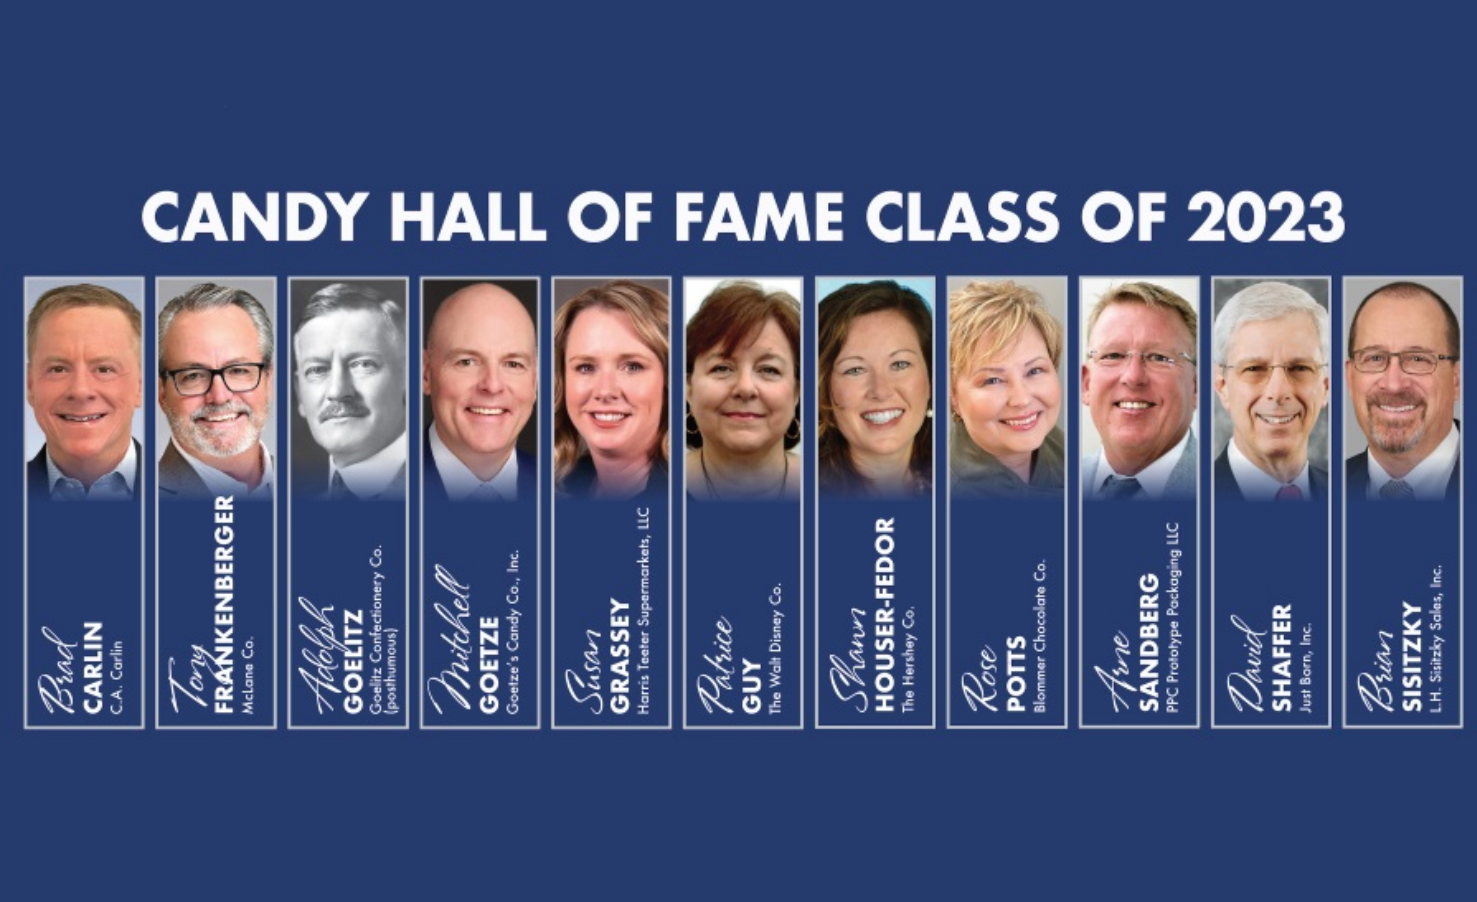 National Confectionery Sales Association reveals 2023 Candy Hall of Fame inductees